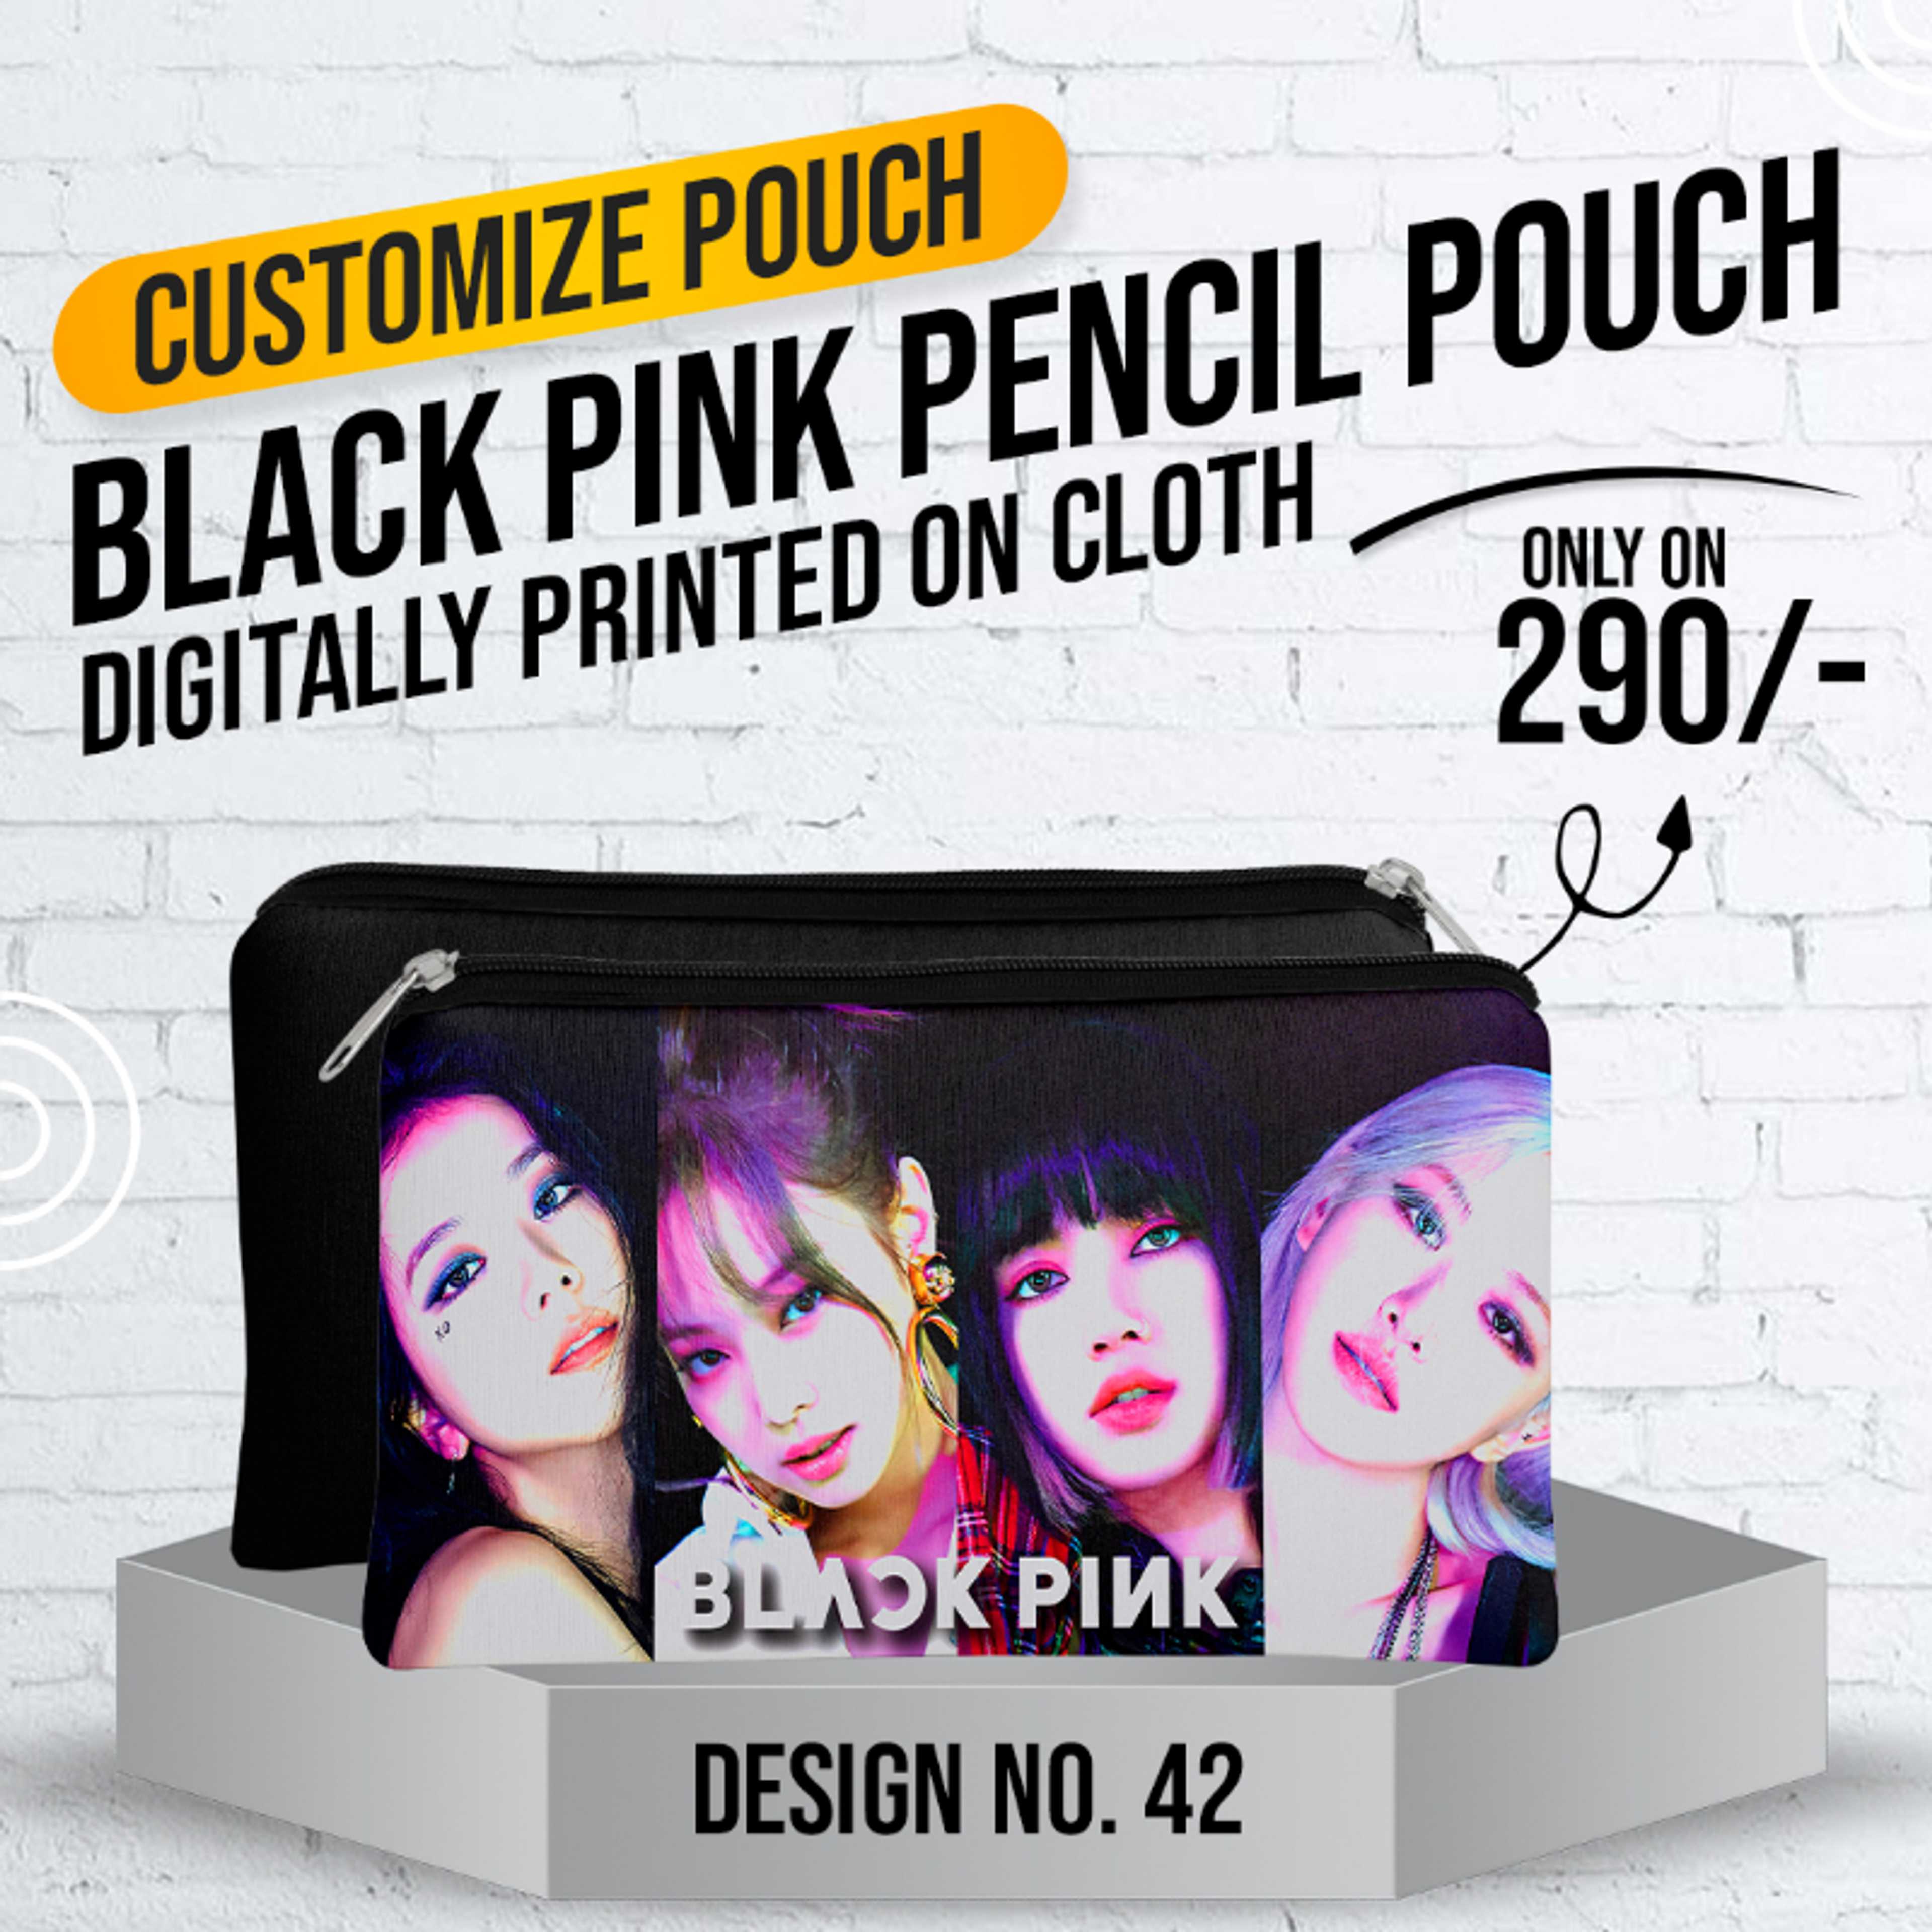 Black Pink Pencil Pouch (Digitally printed on Cloth) D-42